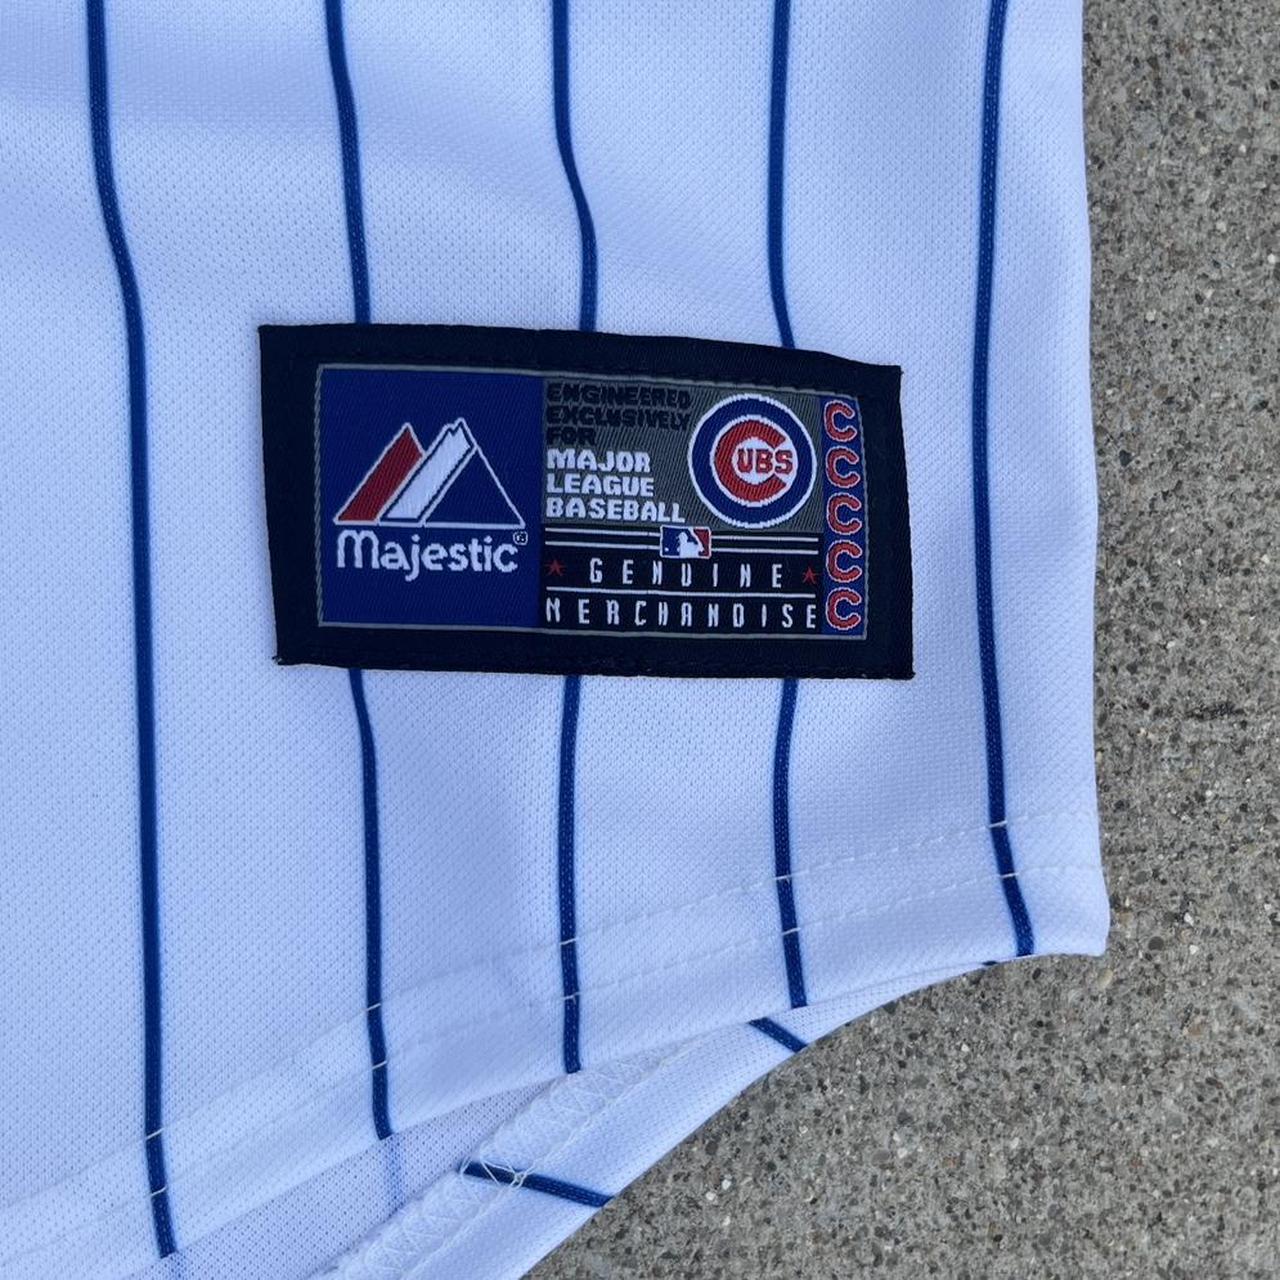 Baseball Jersey – Chicago Cubs – Lee #25 – Mlb – Pin Striped